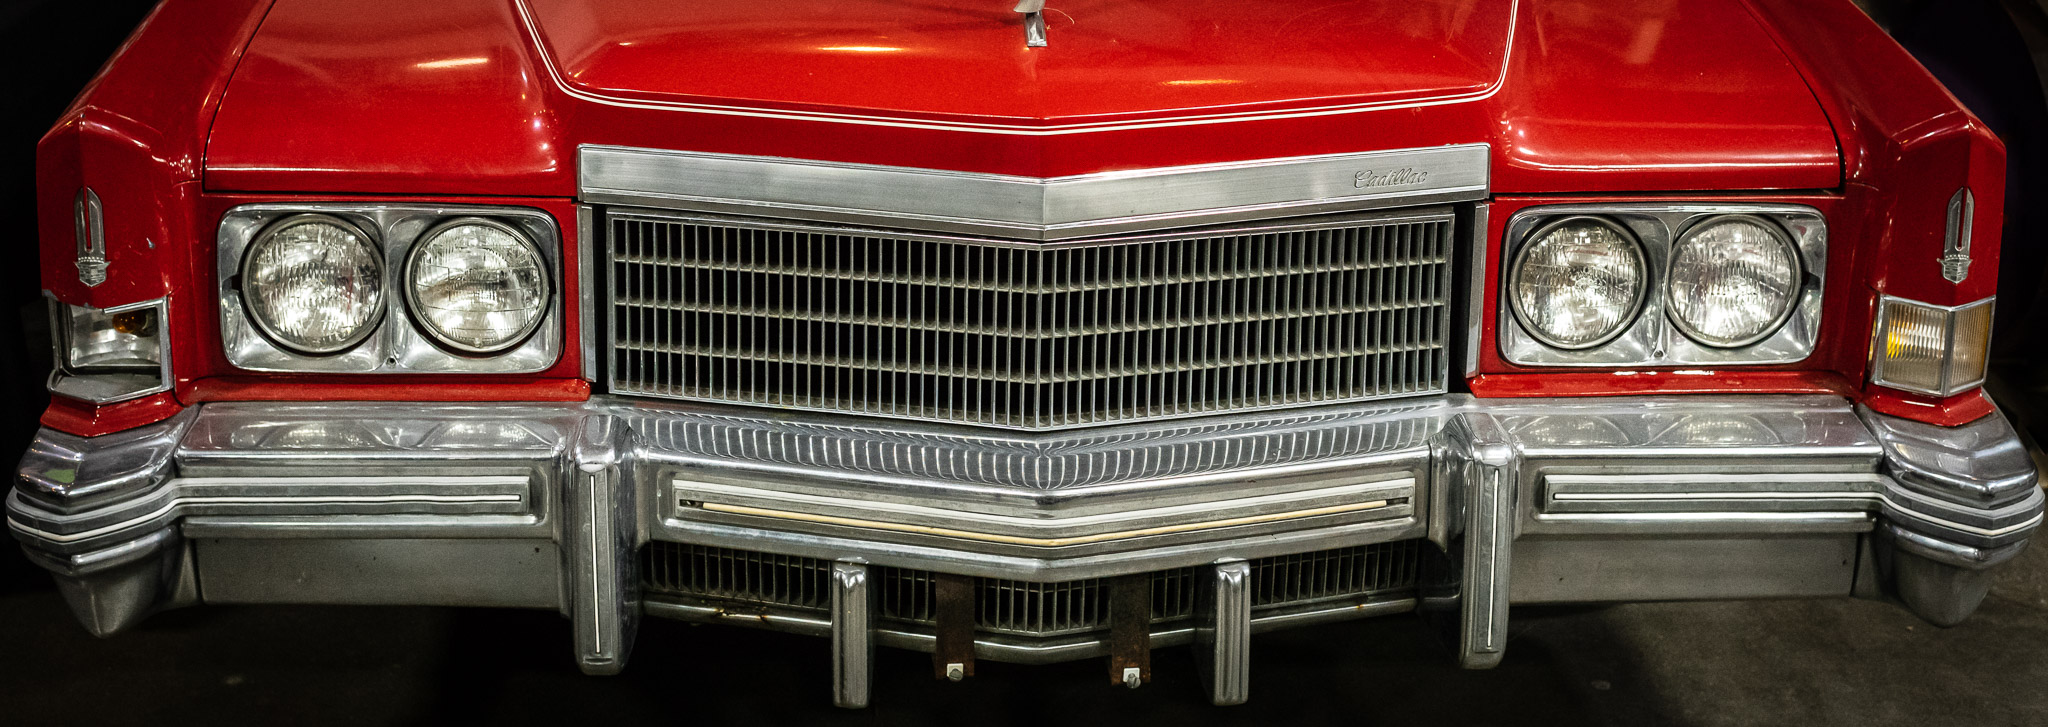 Caddy Grille